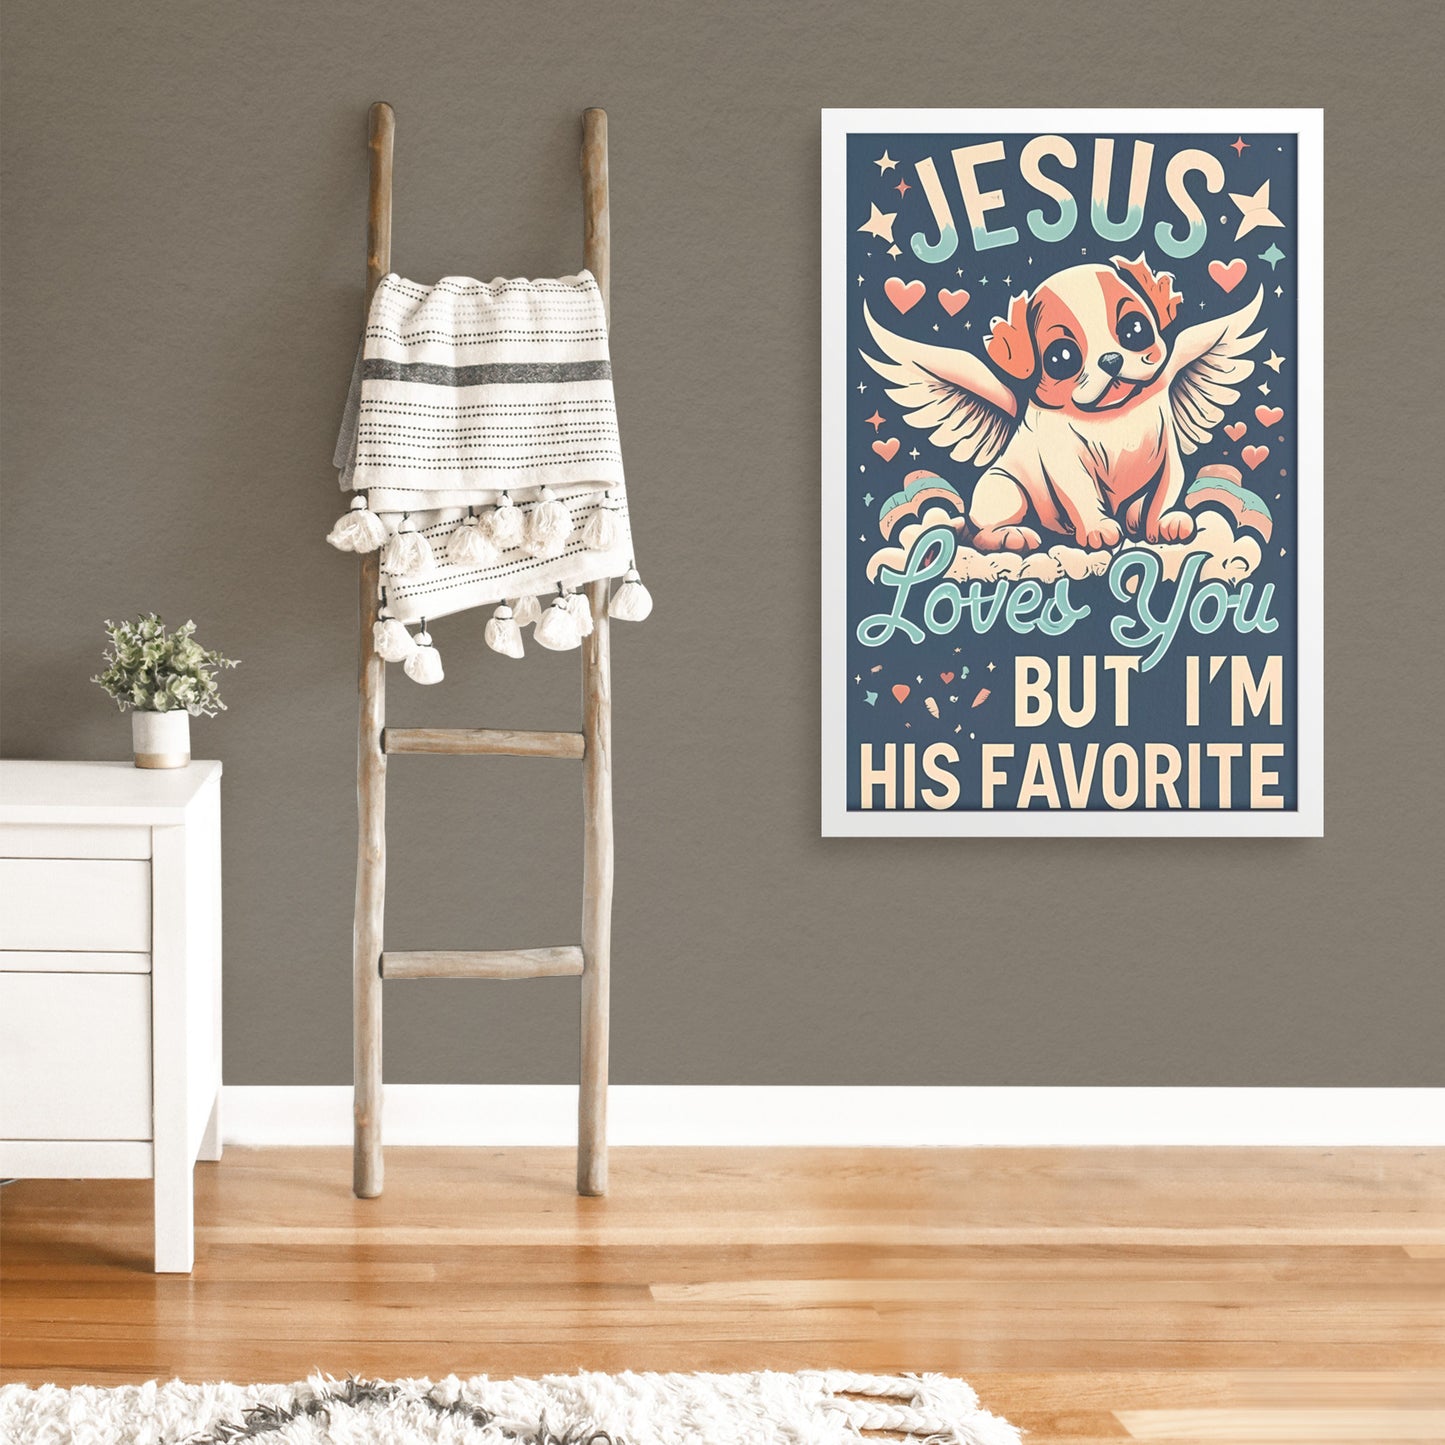 Jesus Loves You, But I'm His Favorite Retro Style Kawaii Angel Puppy Framed Poster